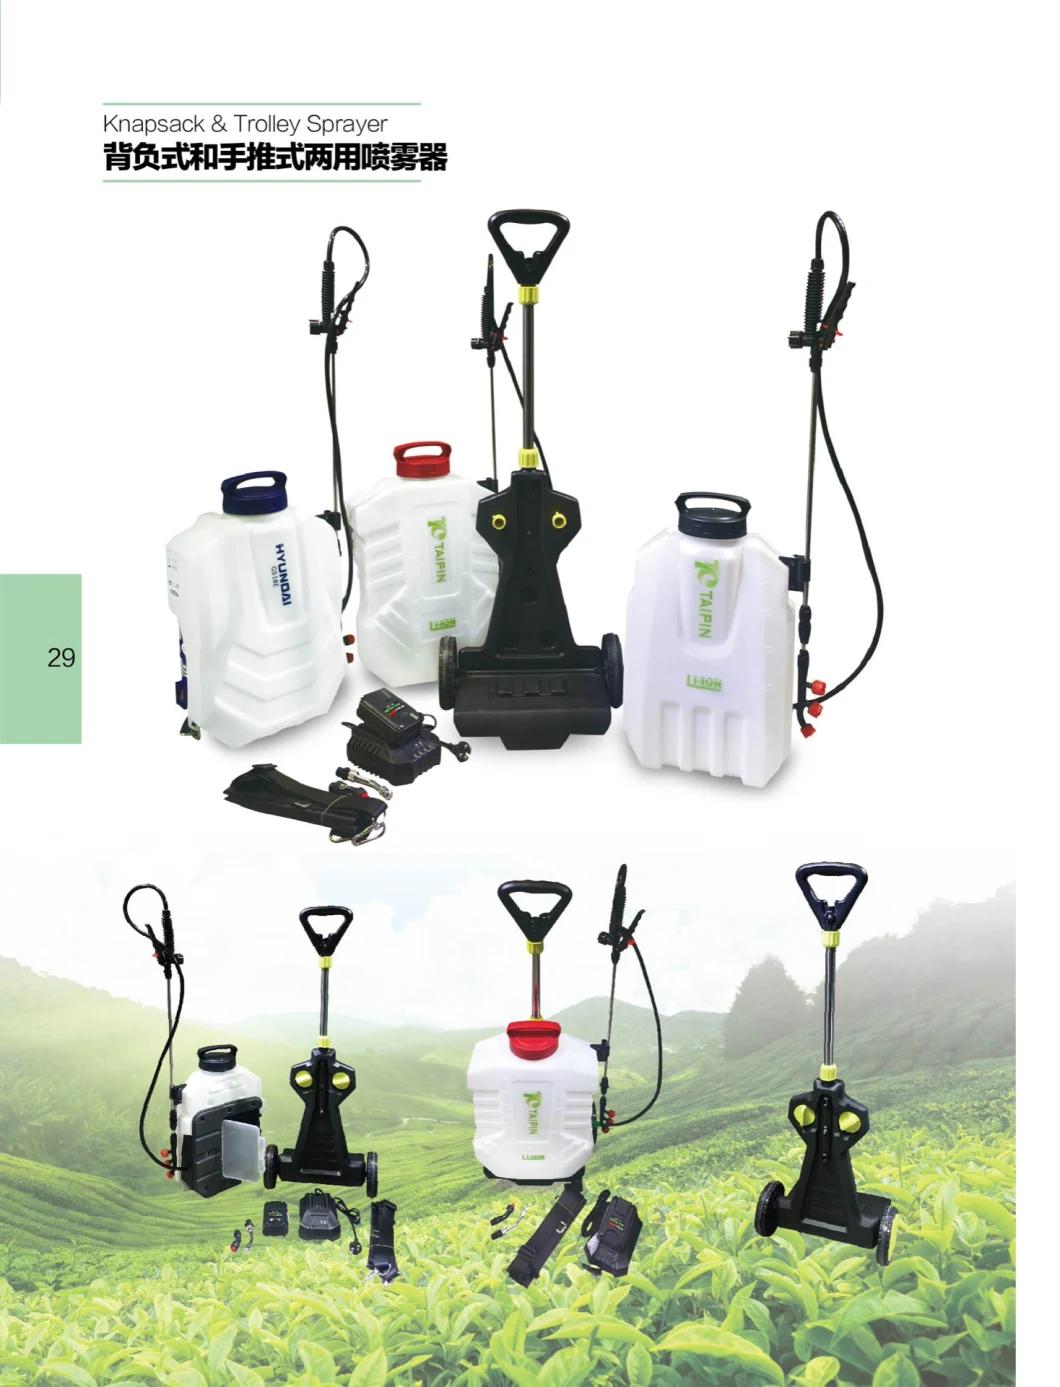 25 L Farm Agricultural Tools Knapsack Battery Operated Pump Sprayer for Pest Control